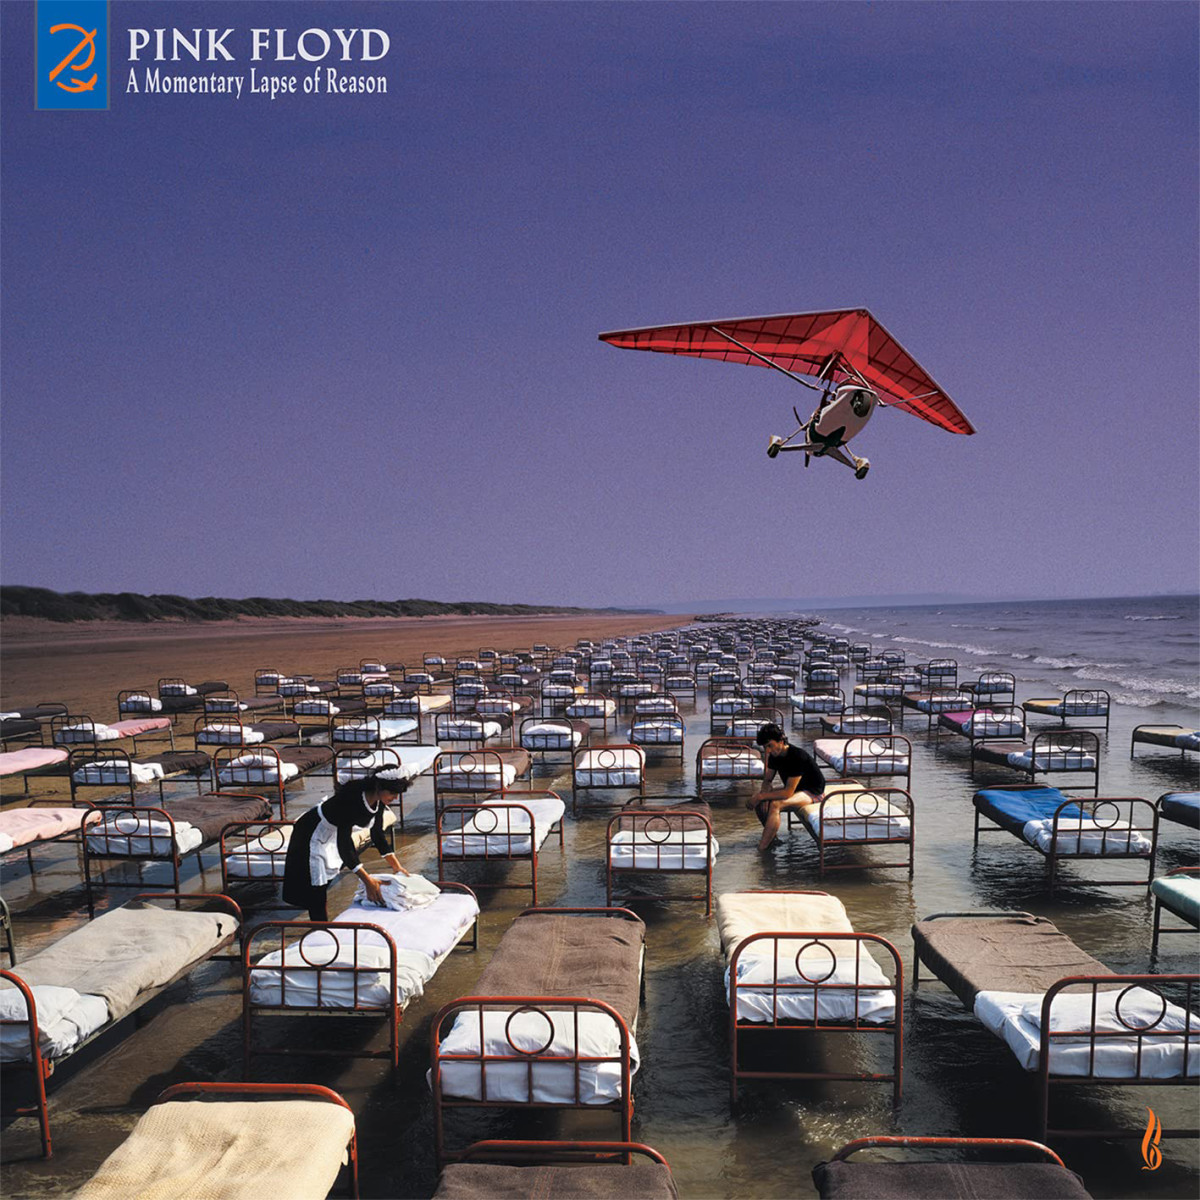 New cover artwork for Pink Floyd’s A Momentary Lapse of Reason